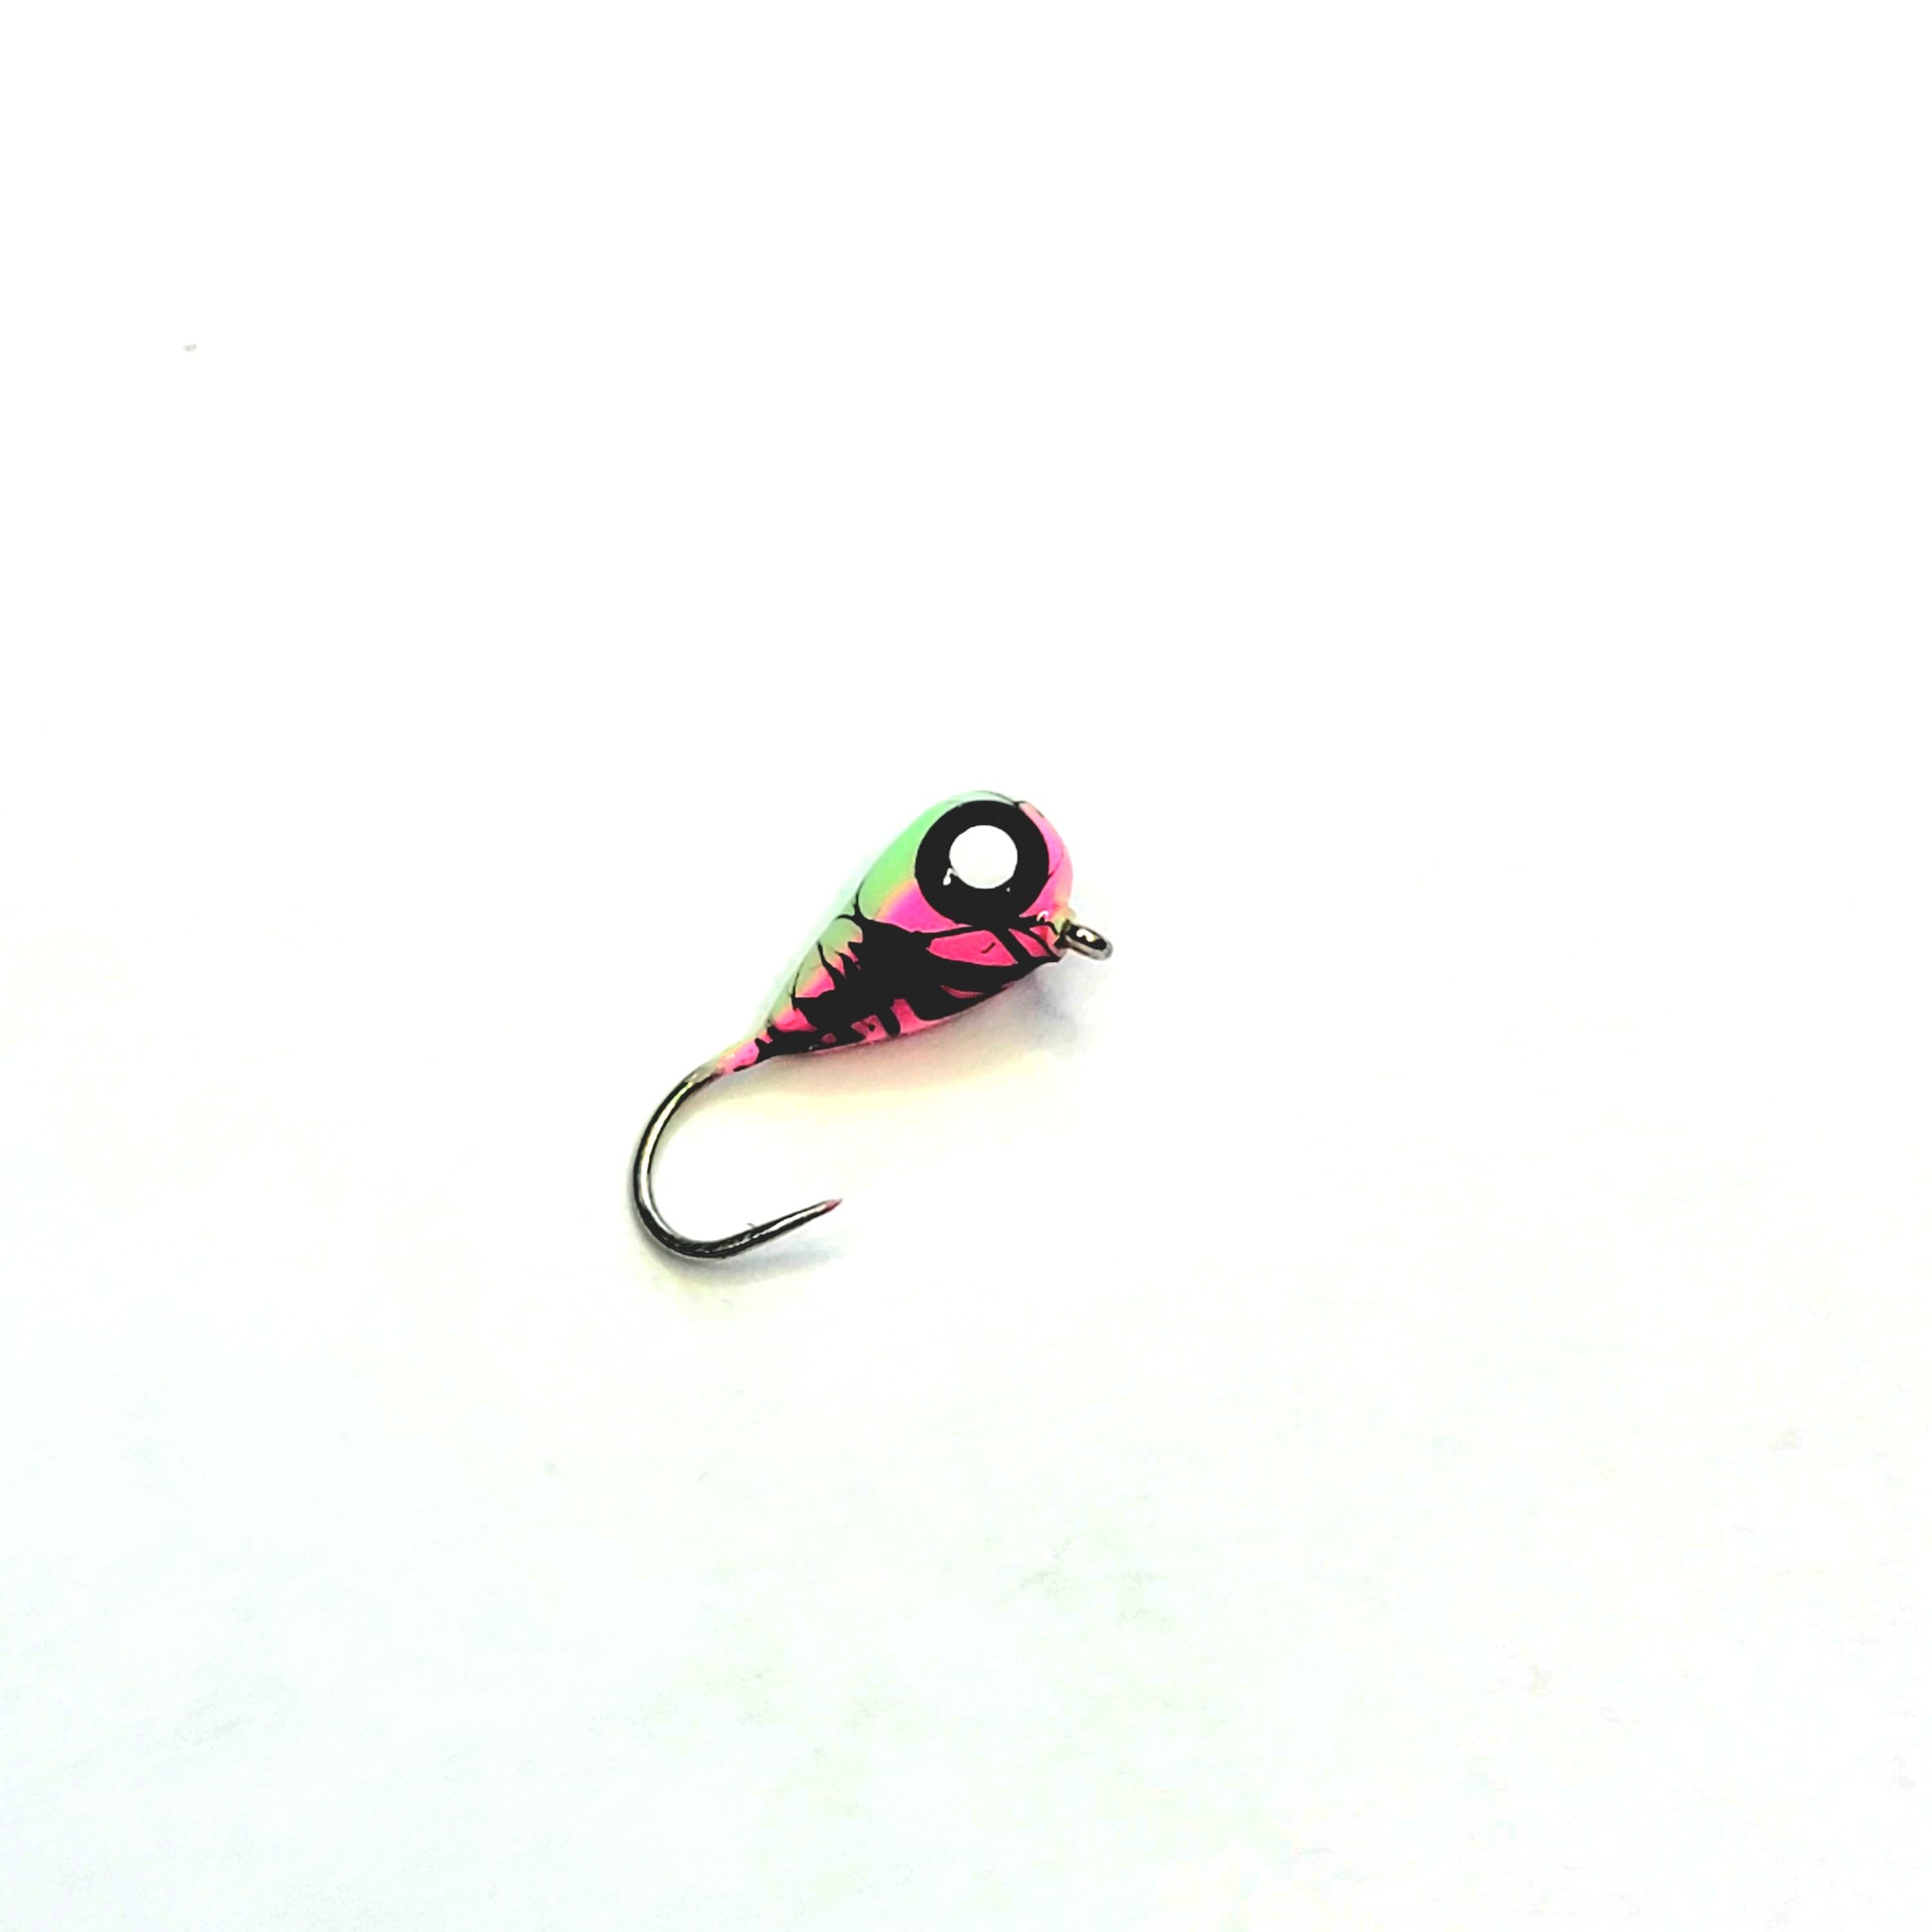 * Tungsten Jigs 3mm & 4mm * Now Clear Coated with KBS Diamond Top Coat *